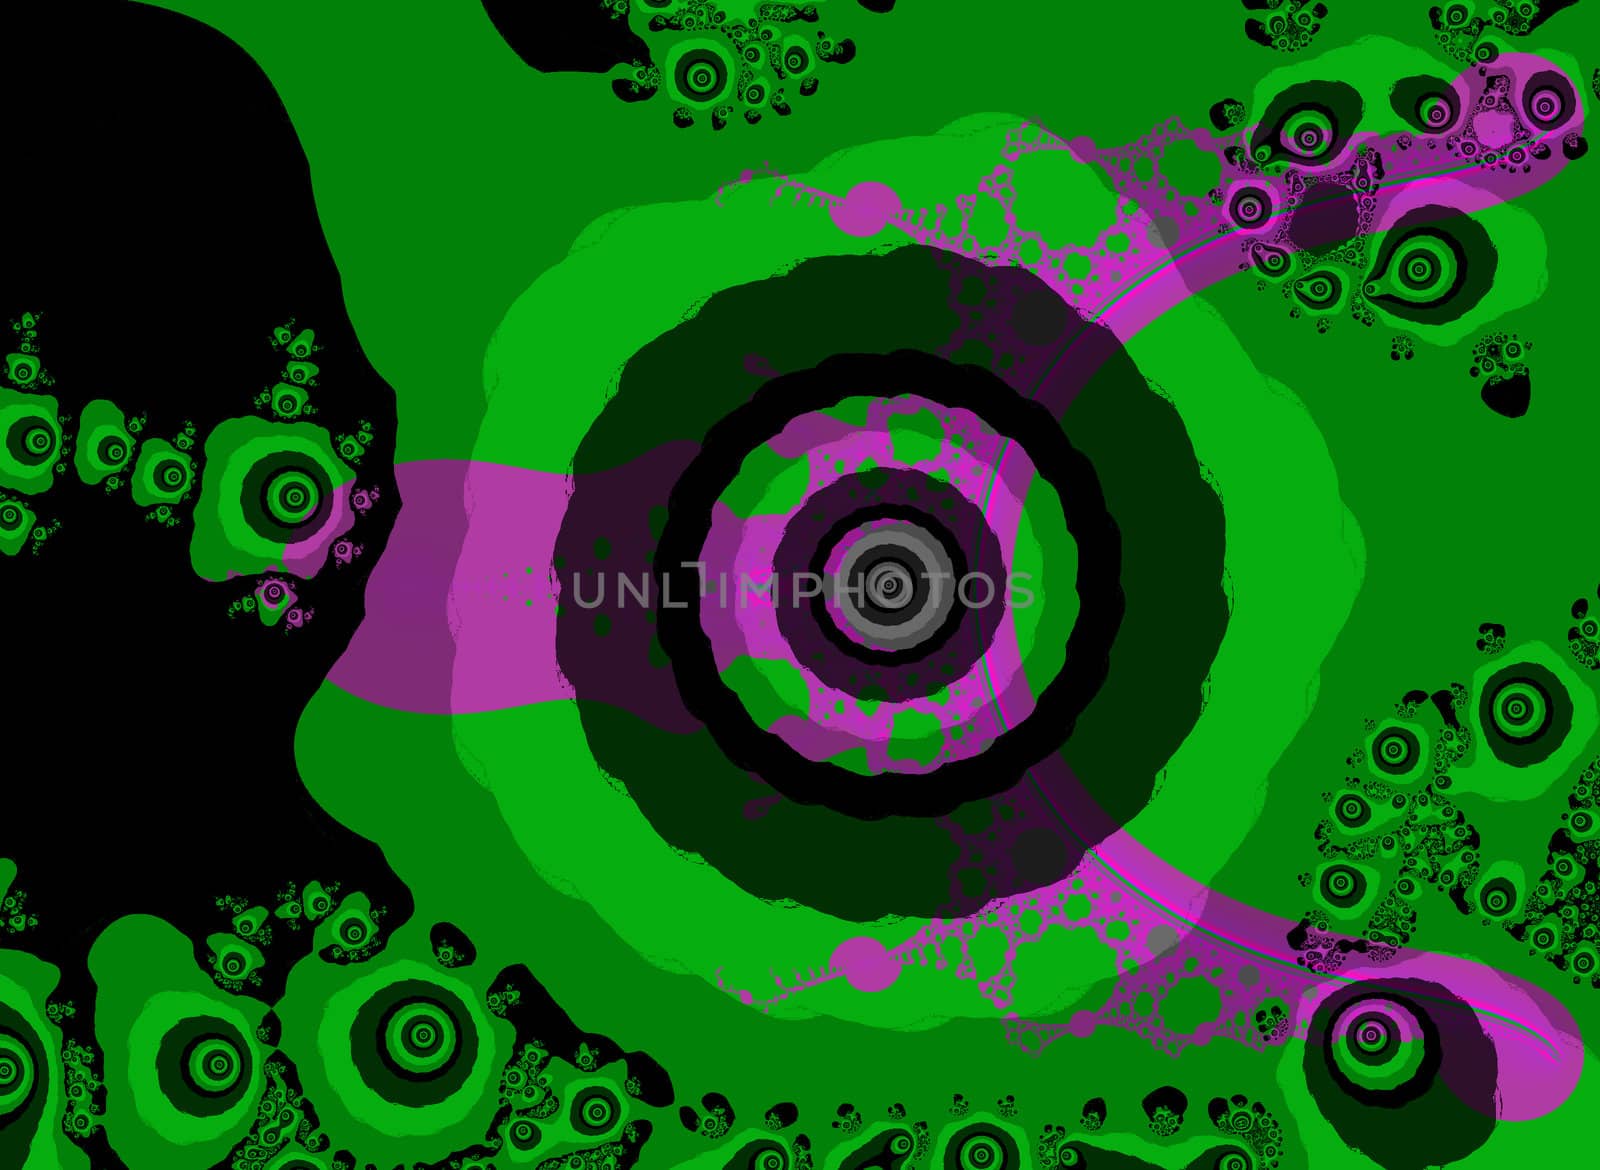 Green and Purple Fractal Design With Eye Shape looks 60s or 70s Style